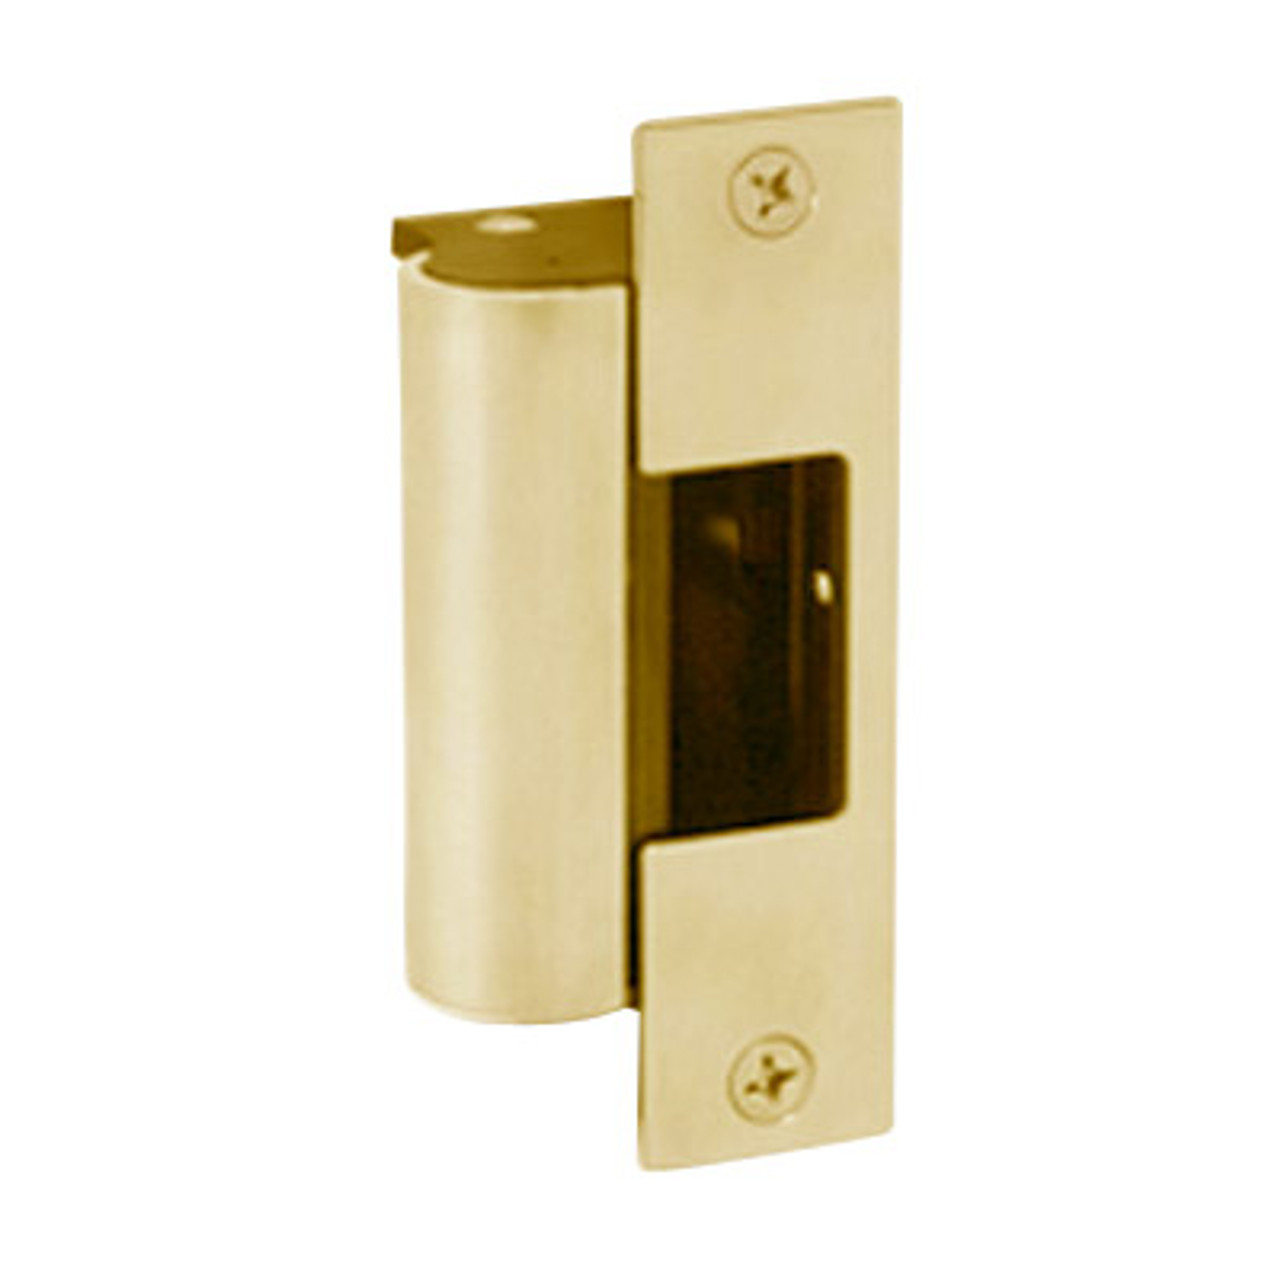 1006-612-LBSM Hes Electric Strike Body with Latchbolt Strike Monitor in Satin Bronze Finish